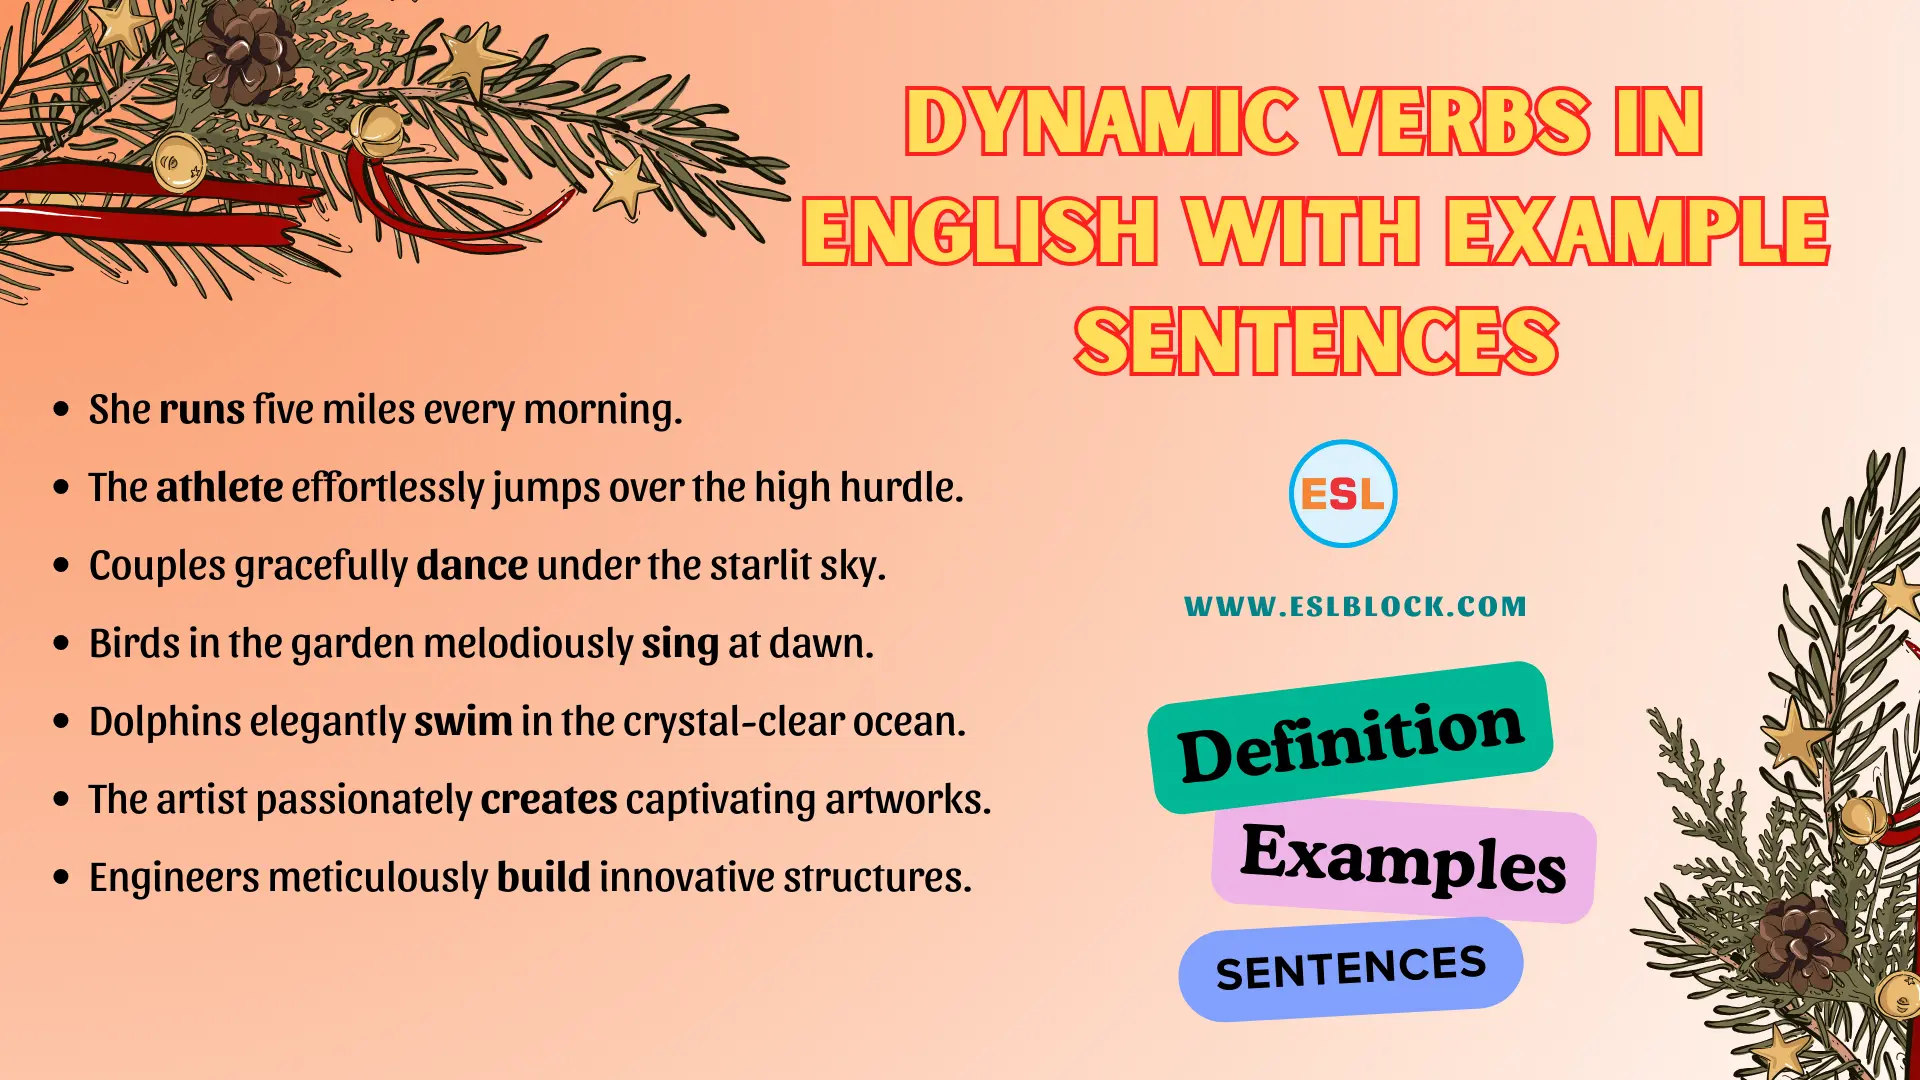 Dynamic Verbs in English with Example Sentences